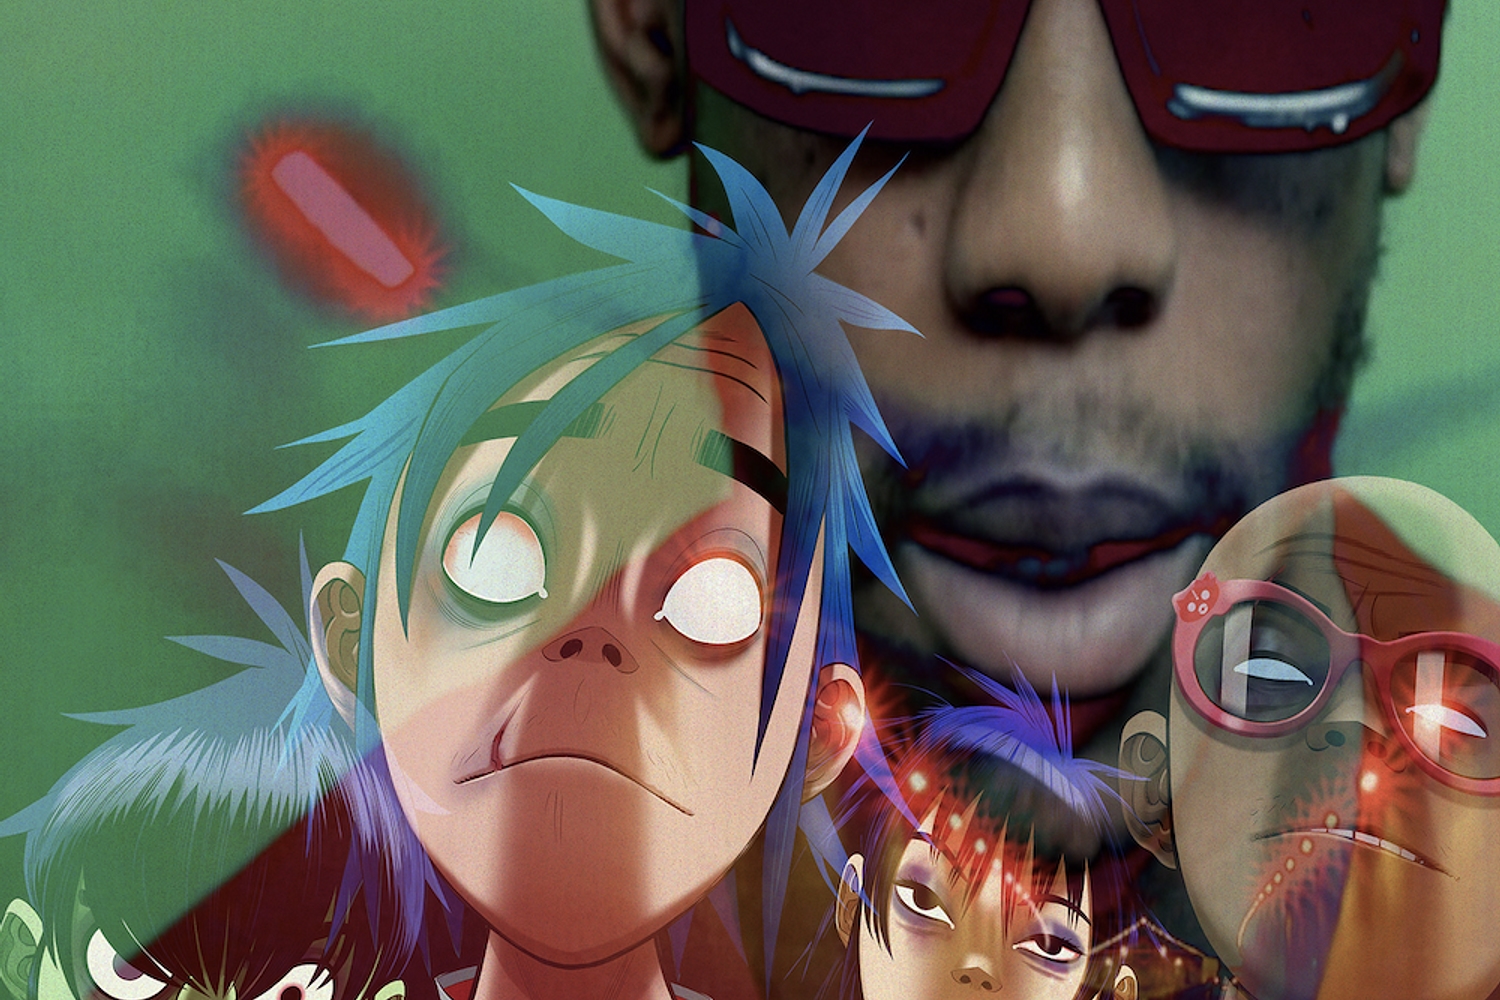 Gorillaz team up with Octavian on new track ‘Friday 13th’